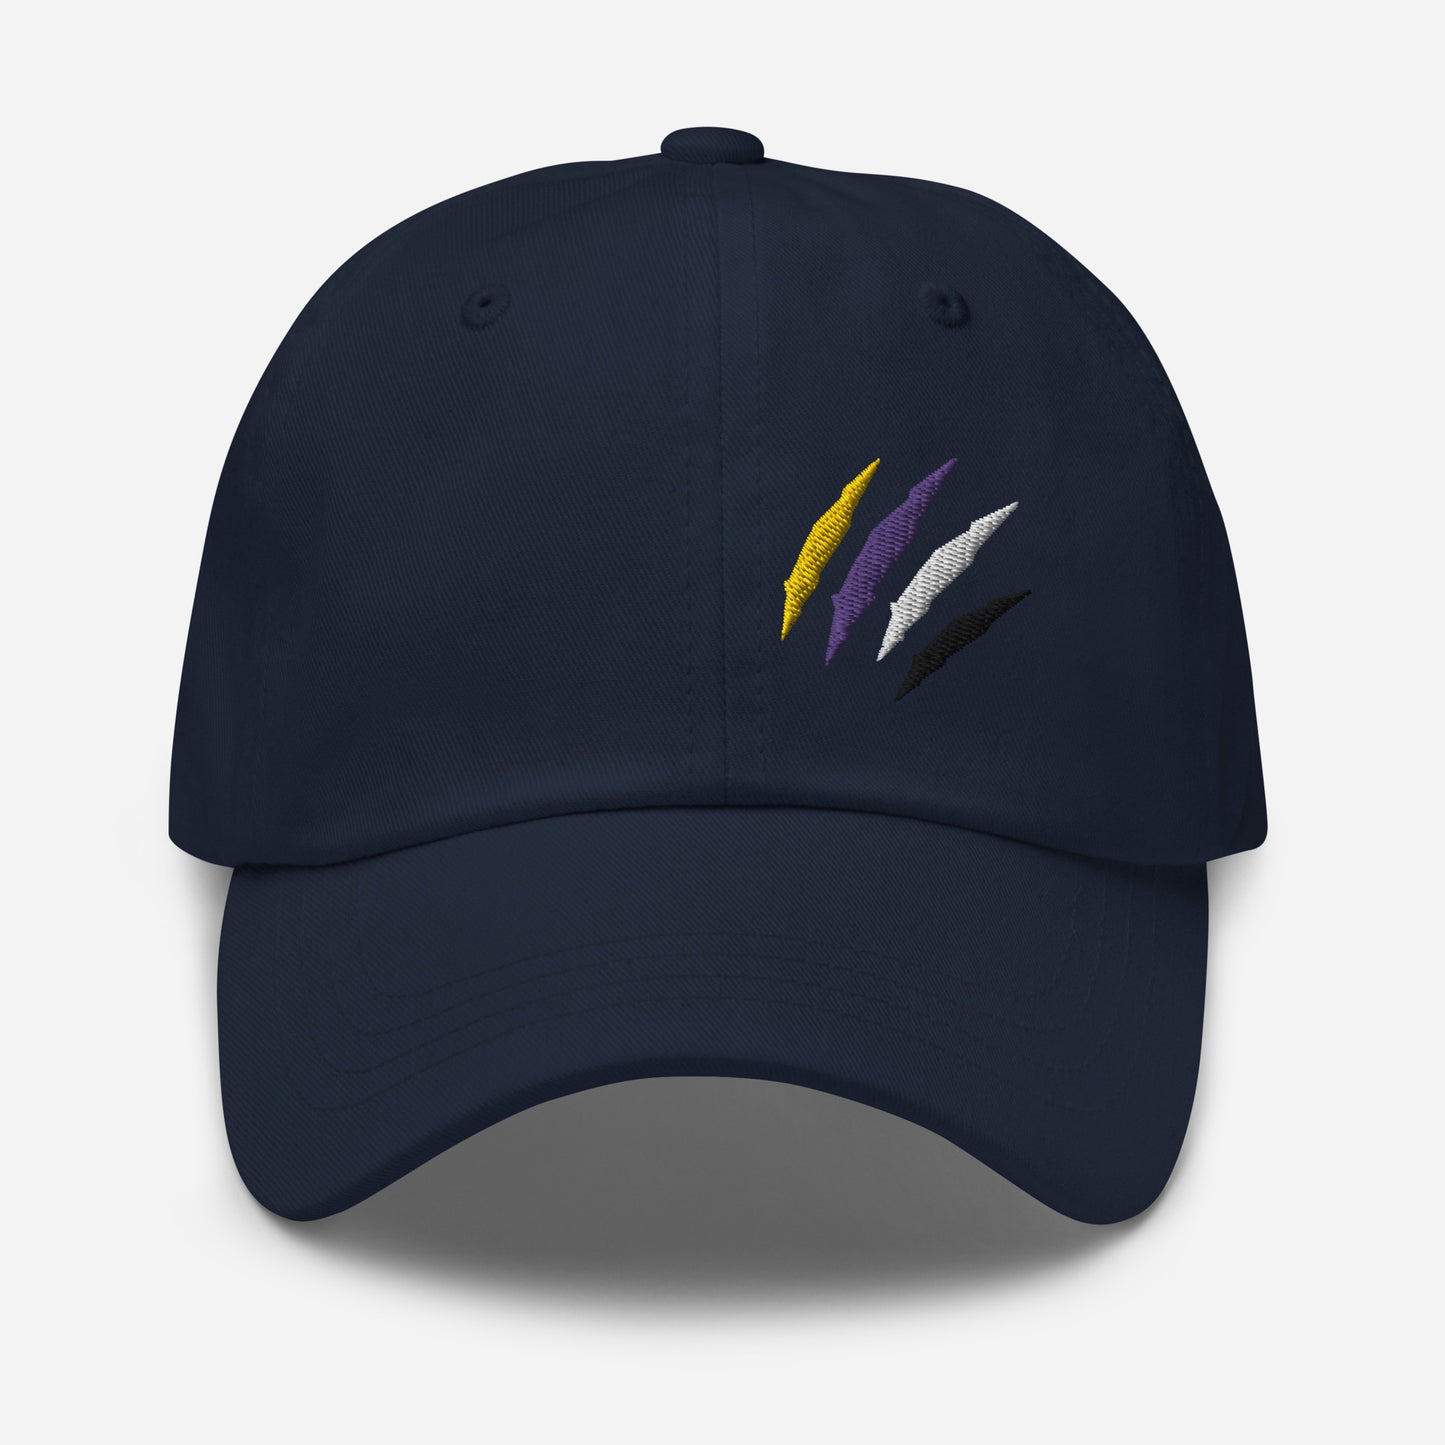 Navy baseball hat featuring non-binary pride scratch mark embroidery with a low profile, adjustable strap.